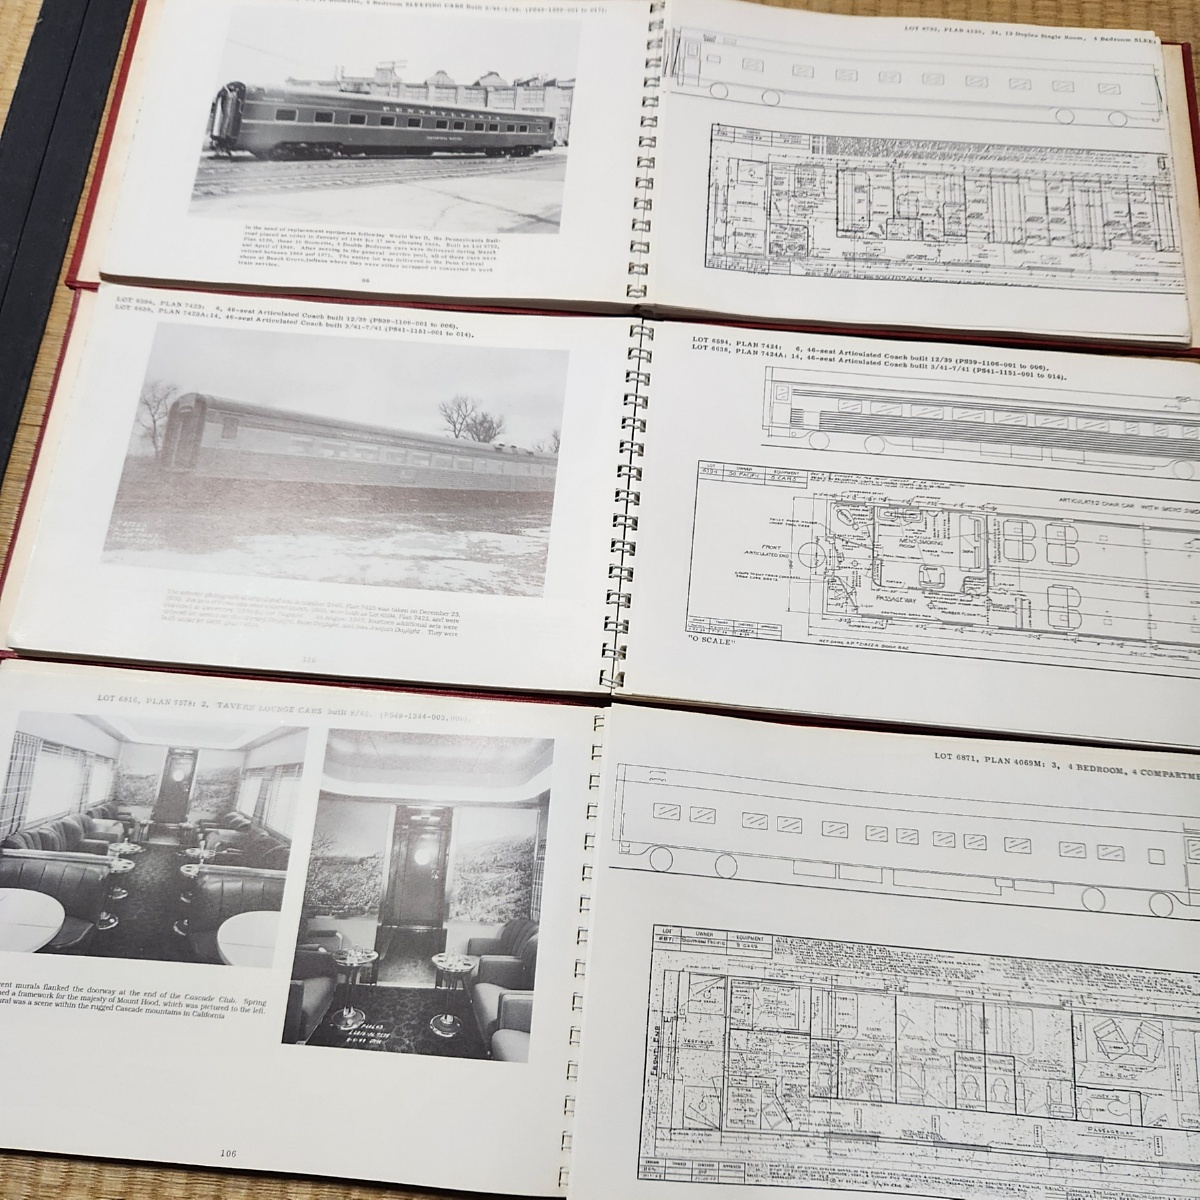 THE OFFICAL PULLMAN-STANDARD Vol.1～6 サンタフェ　ニューヨークセントラル サザンパシフィック等 洋書 鉄道 100s23-4595_画像6